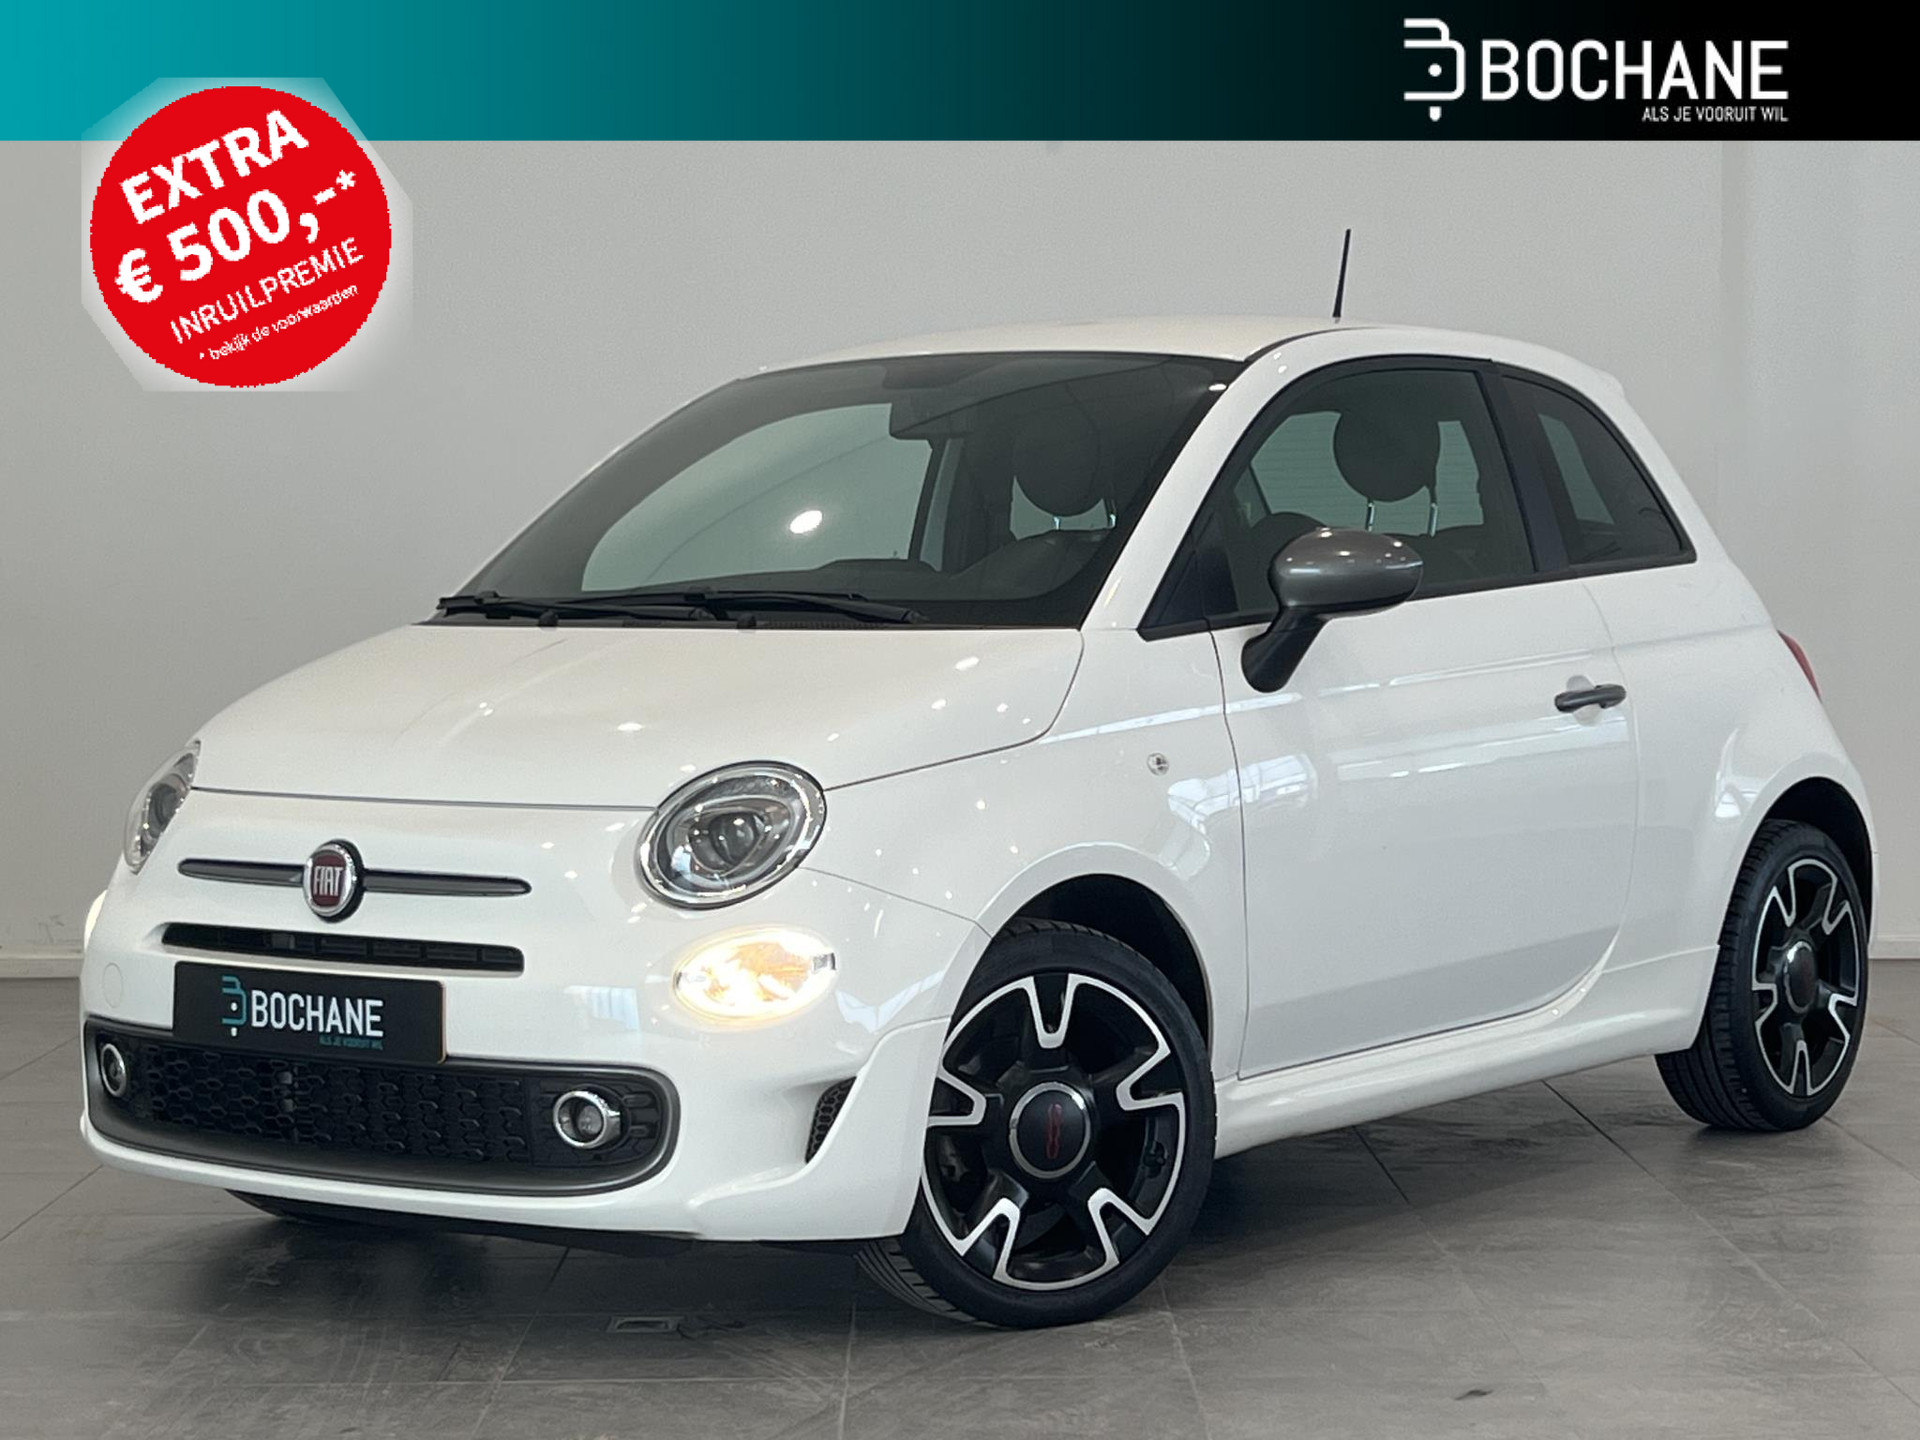 Fiat 500 1.2 69 S CRUISE CONTROL | CLIMATE CONTROL | APPLE CARPLAY / ANDROID AUTO | LICHT METAAL | LED-DAGRIJVERLICHTING | bij viaBOVAG.nl